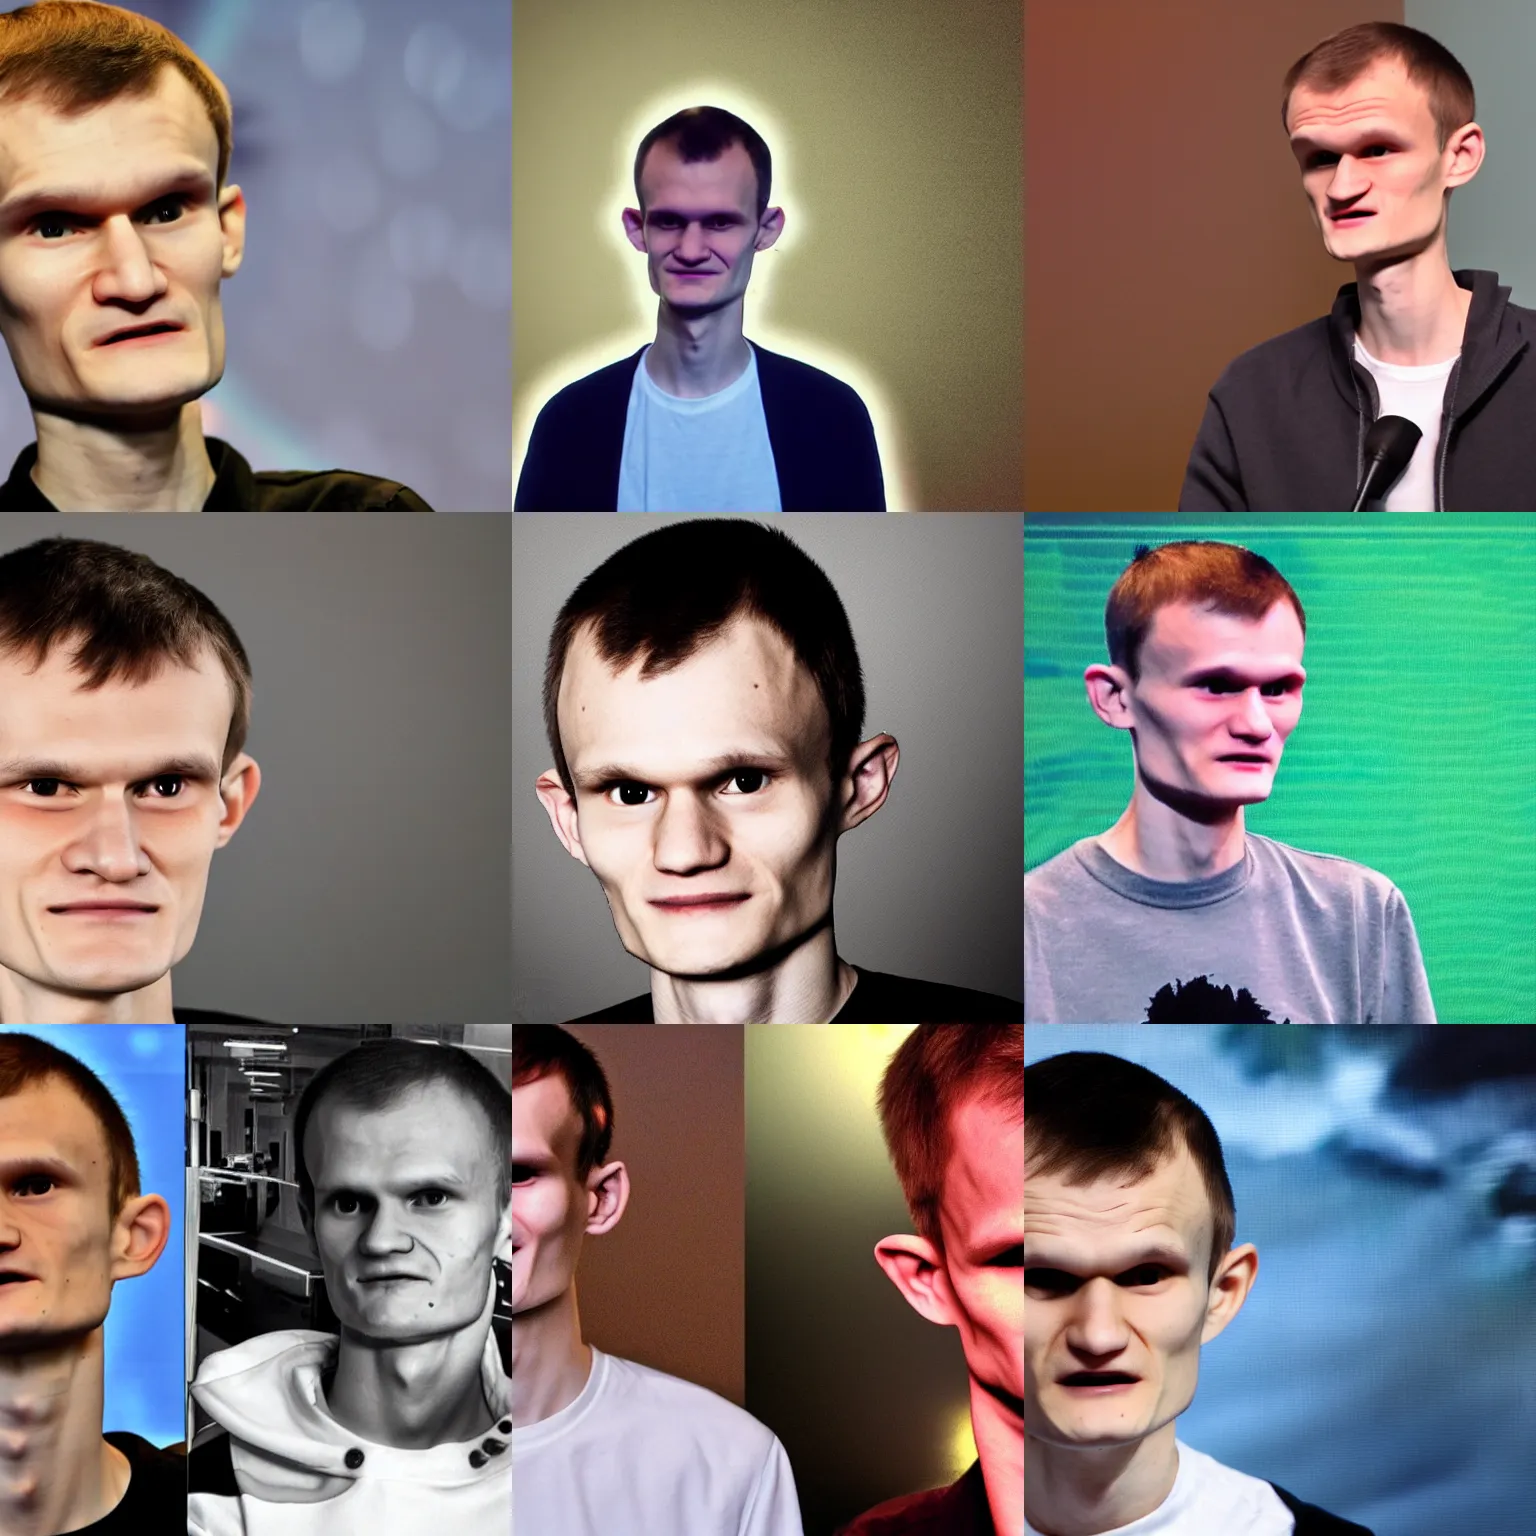 Prompt: <picture quality=hd+ mode='attention grabbing'>Vitalik Buterin reveals that he is an alien from another world</picture>